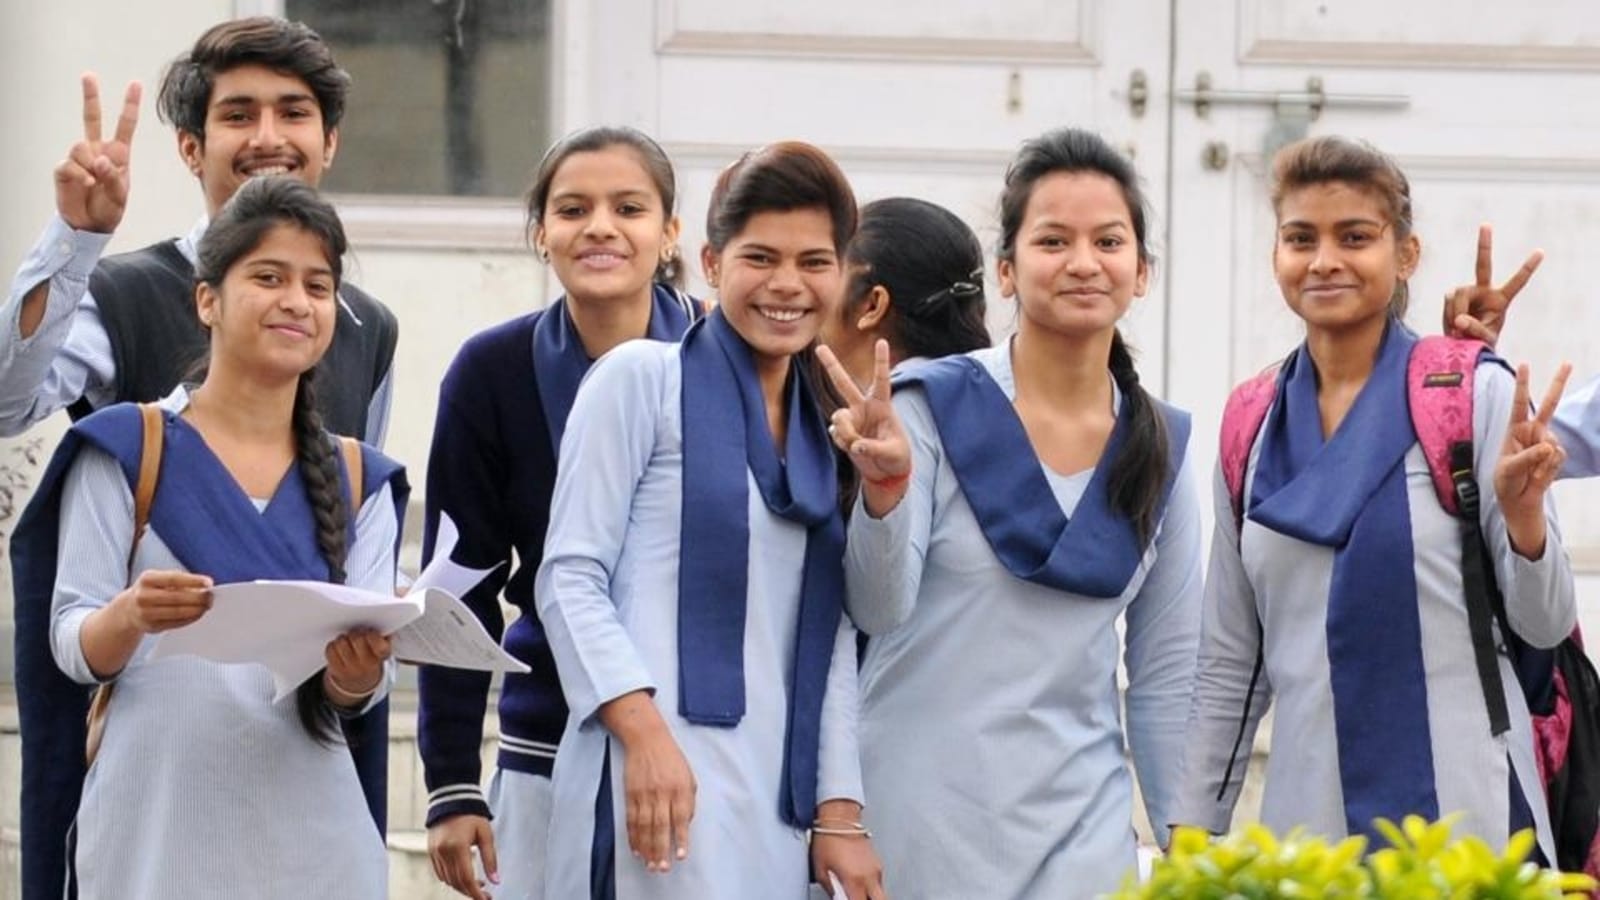 CBSE Results 2022 LIVE: Class 10th, 12th results awaited at cbseresults.nic.in